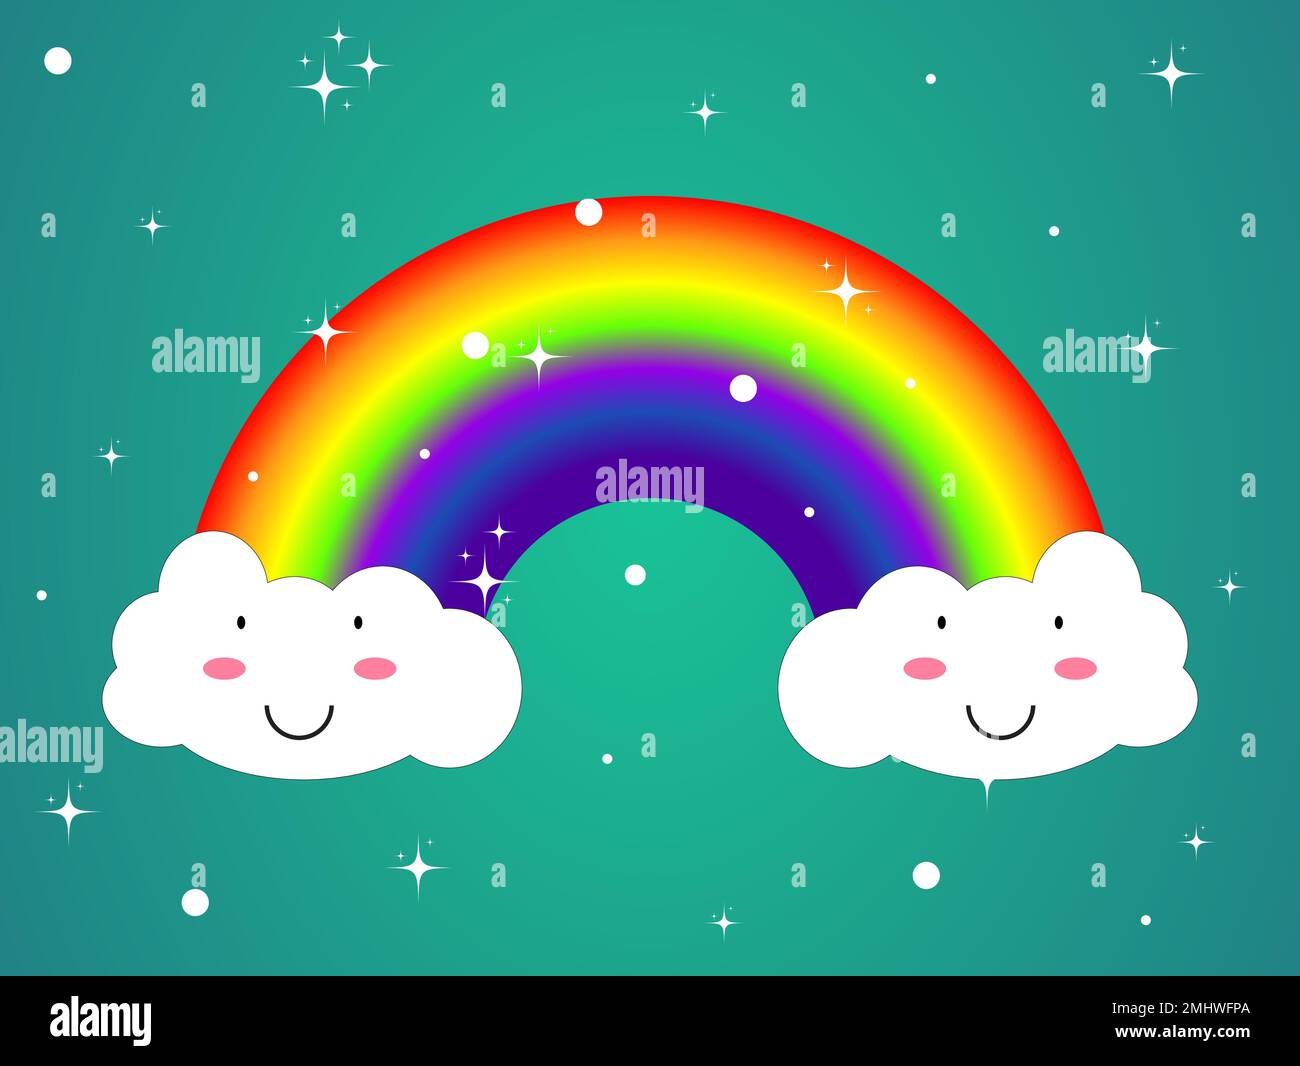 Colorful rainbow with clouds, backgrounds vector illustration. Stock Vector